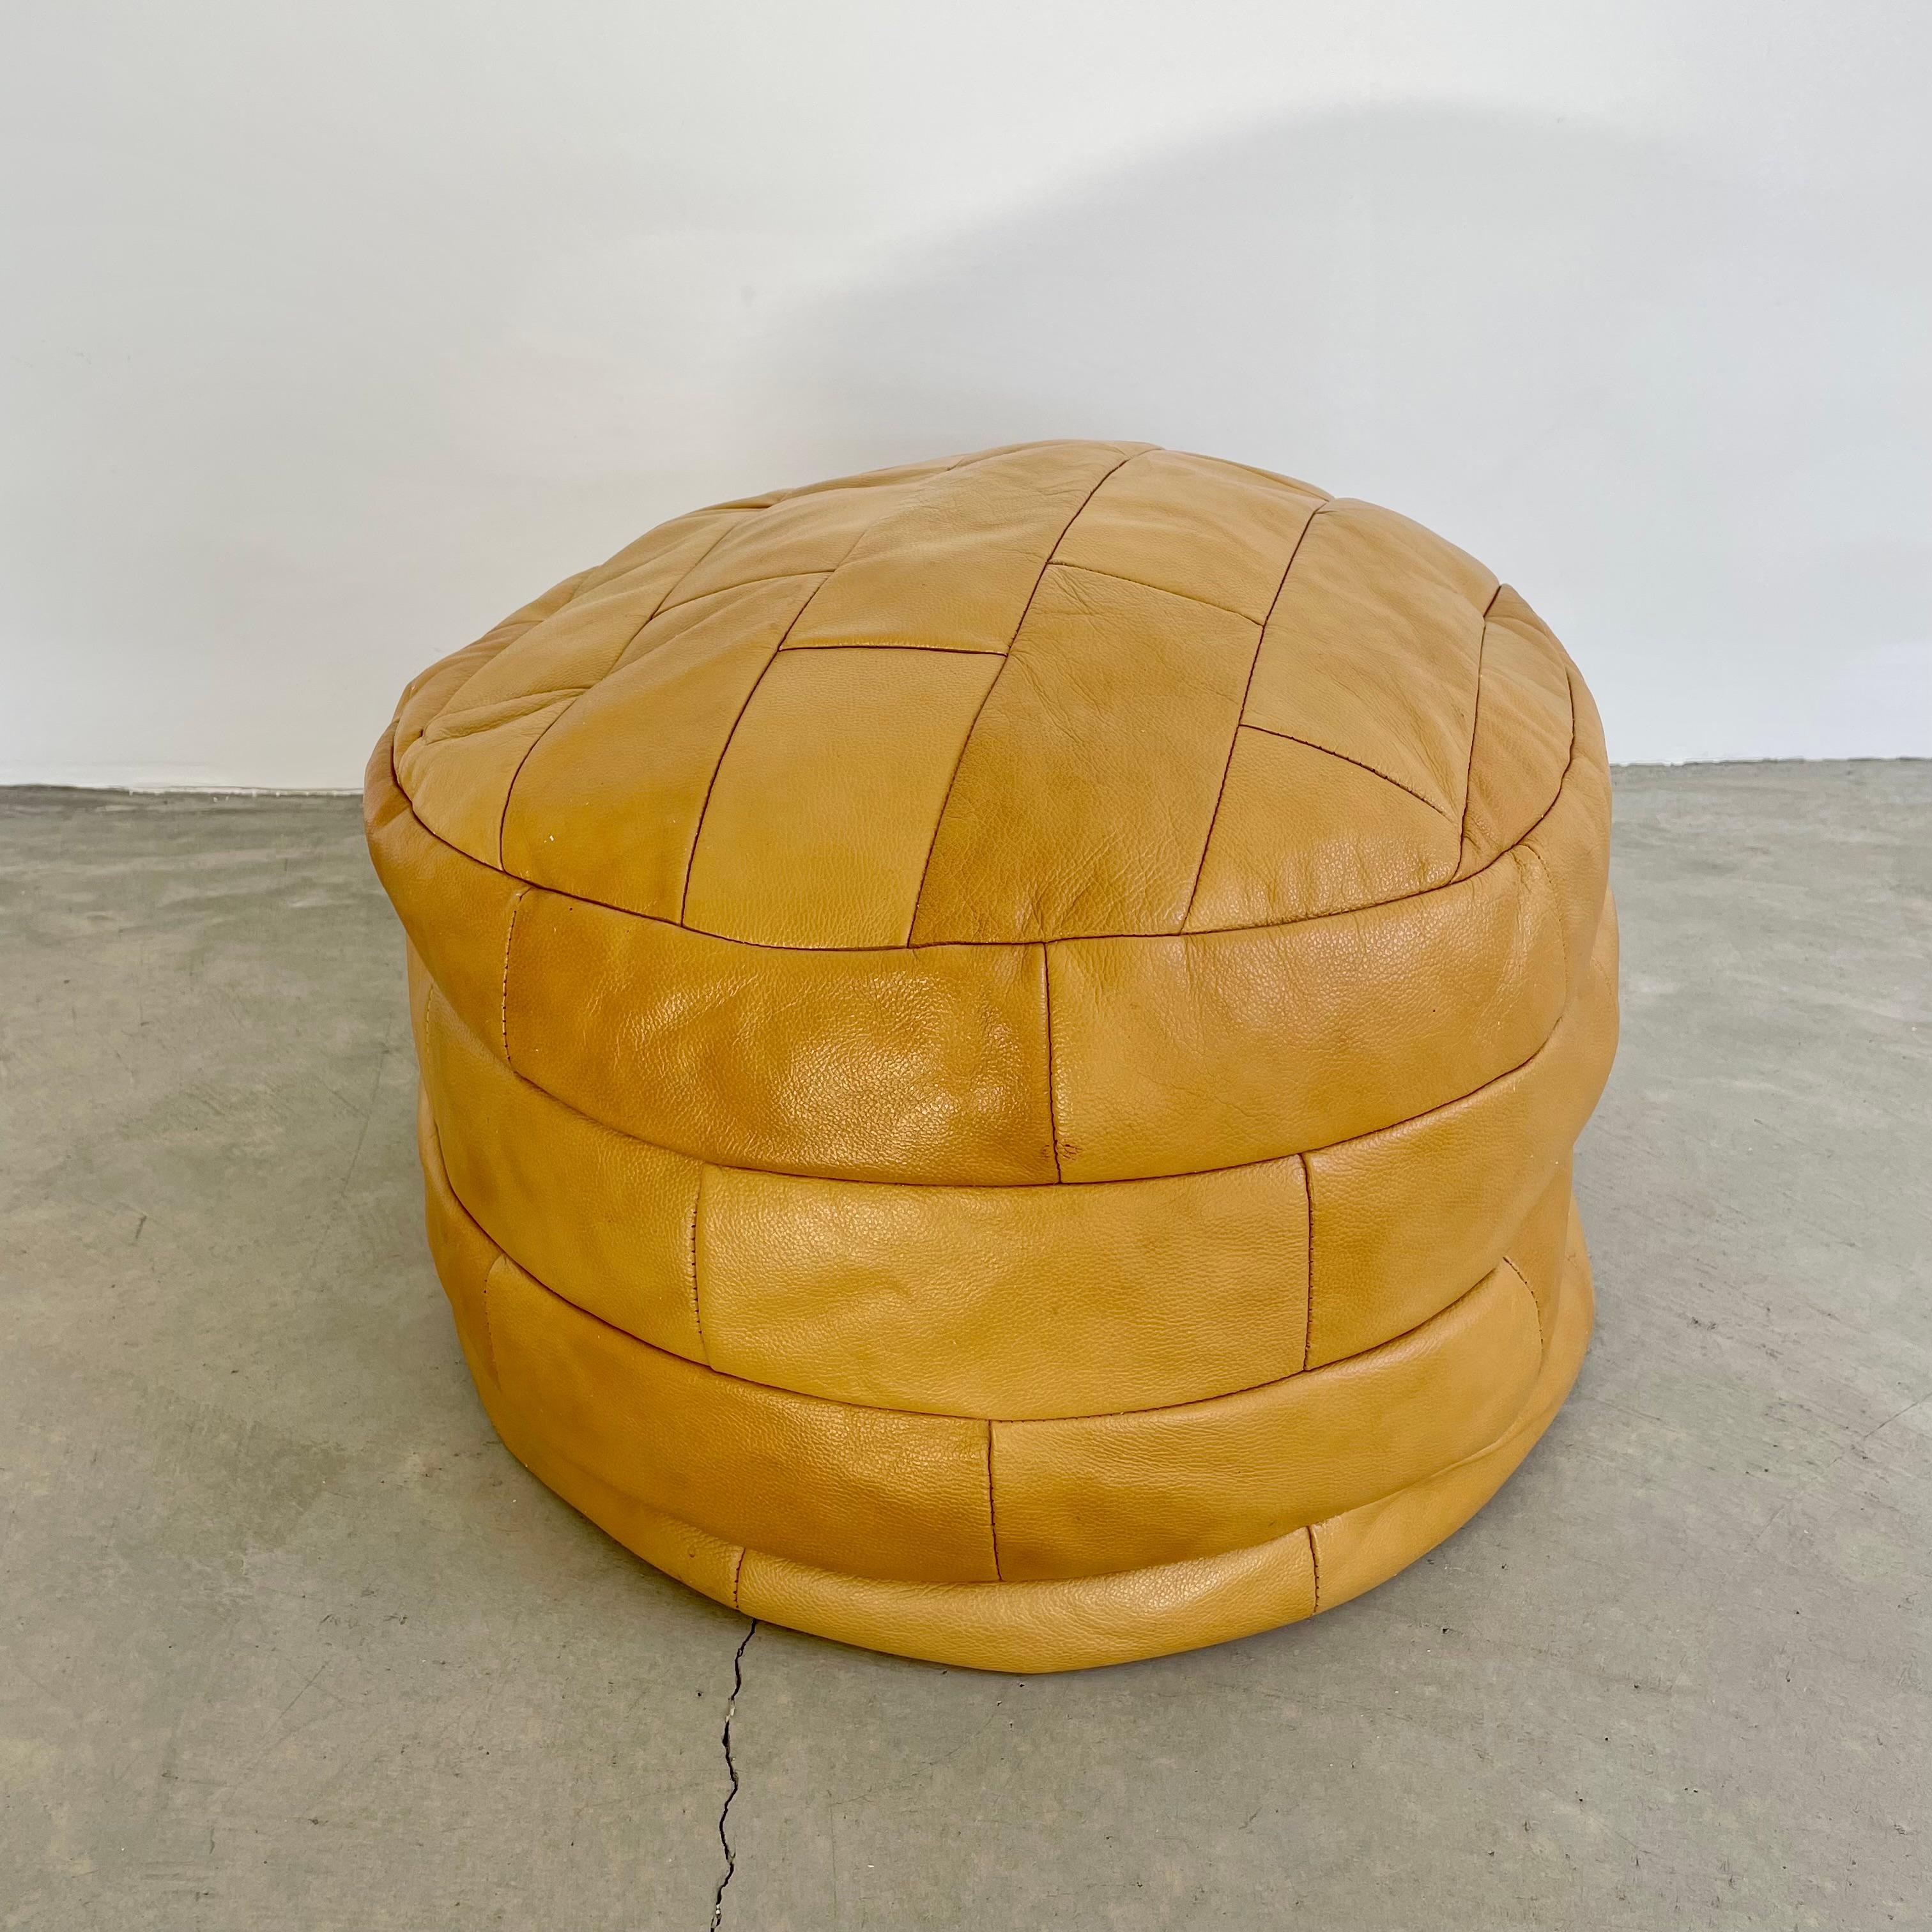 Gorgeous deep tan-colored leather pouf/ottoman by Swiss designer De Sede with square patchwork. Handmade with wonderful faded patina. Gorgeous accent piece. Good vintage condition. Wear appropriate with age. Brand new foam beads. Perfect living room